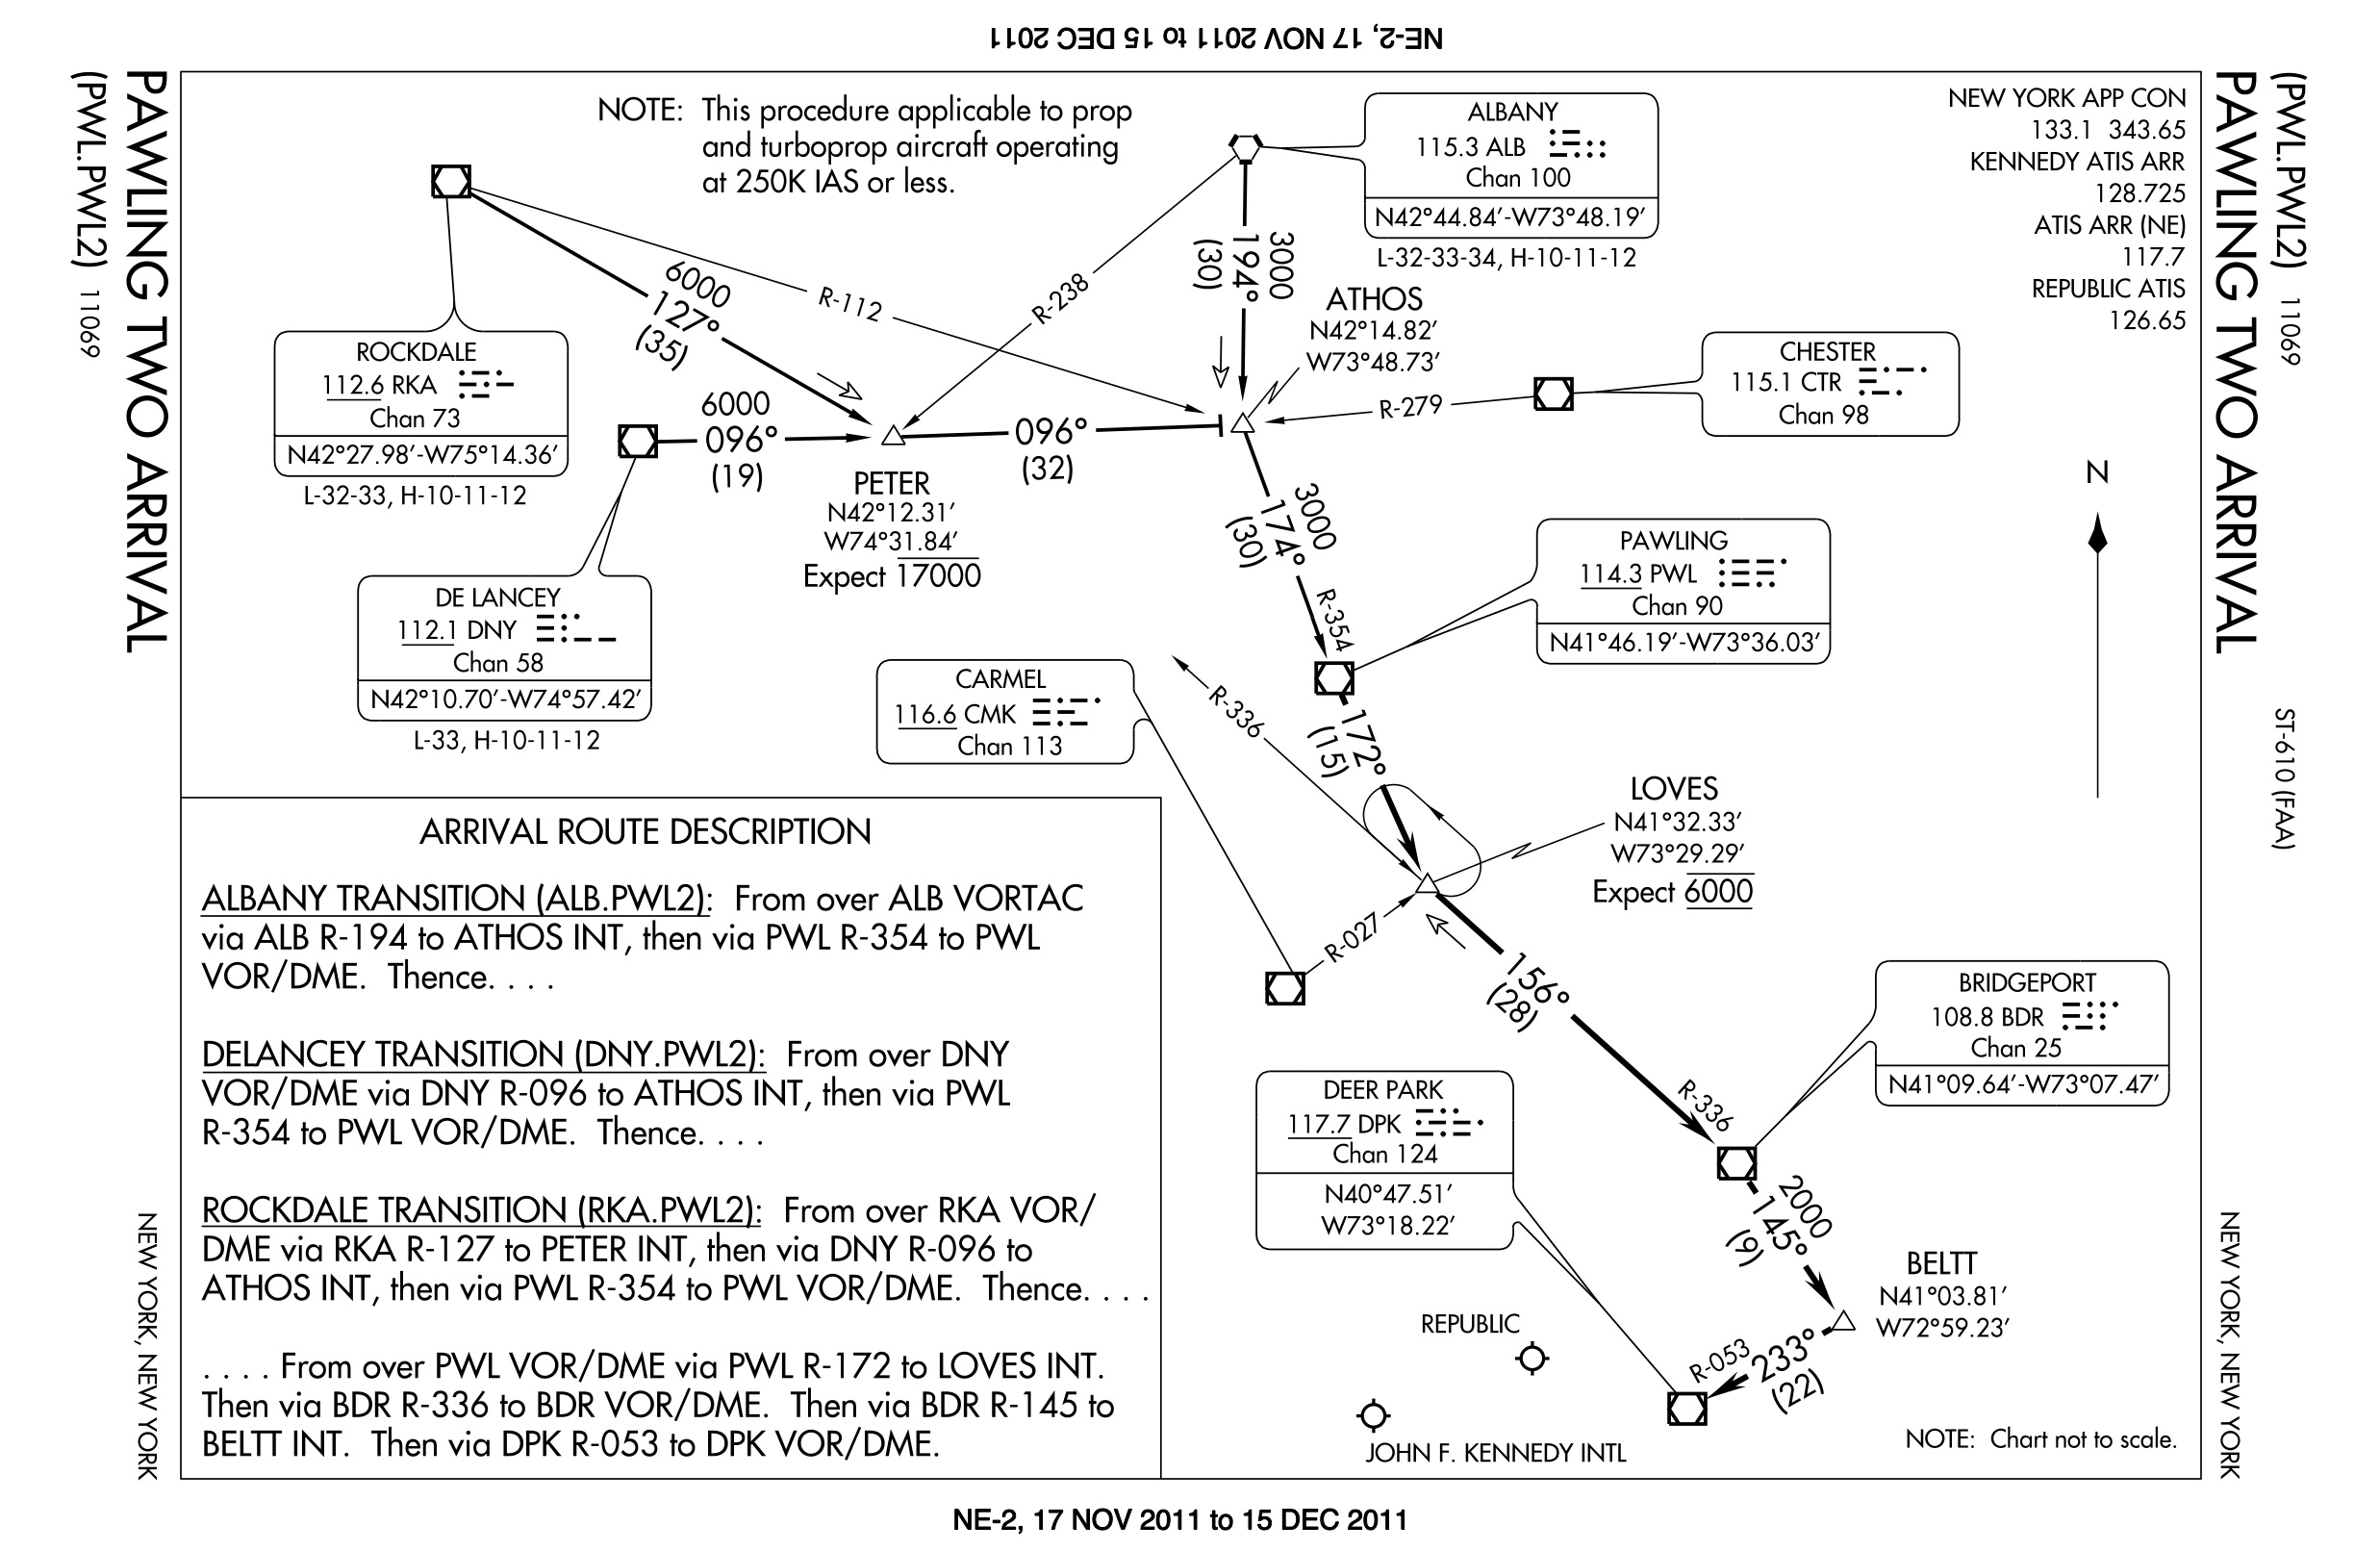 Standard Terminal Arrival Charts